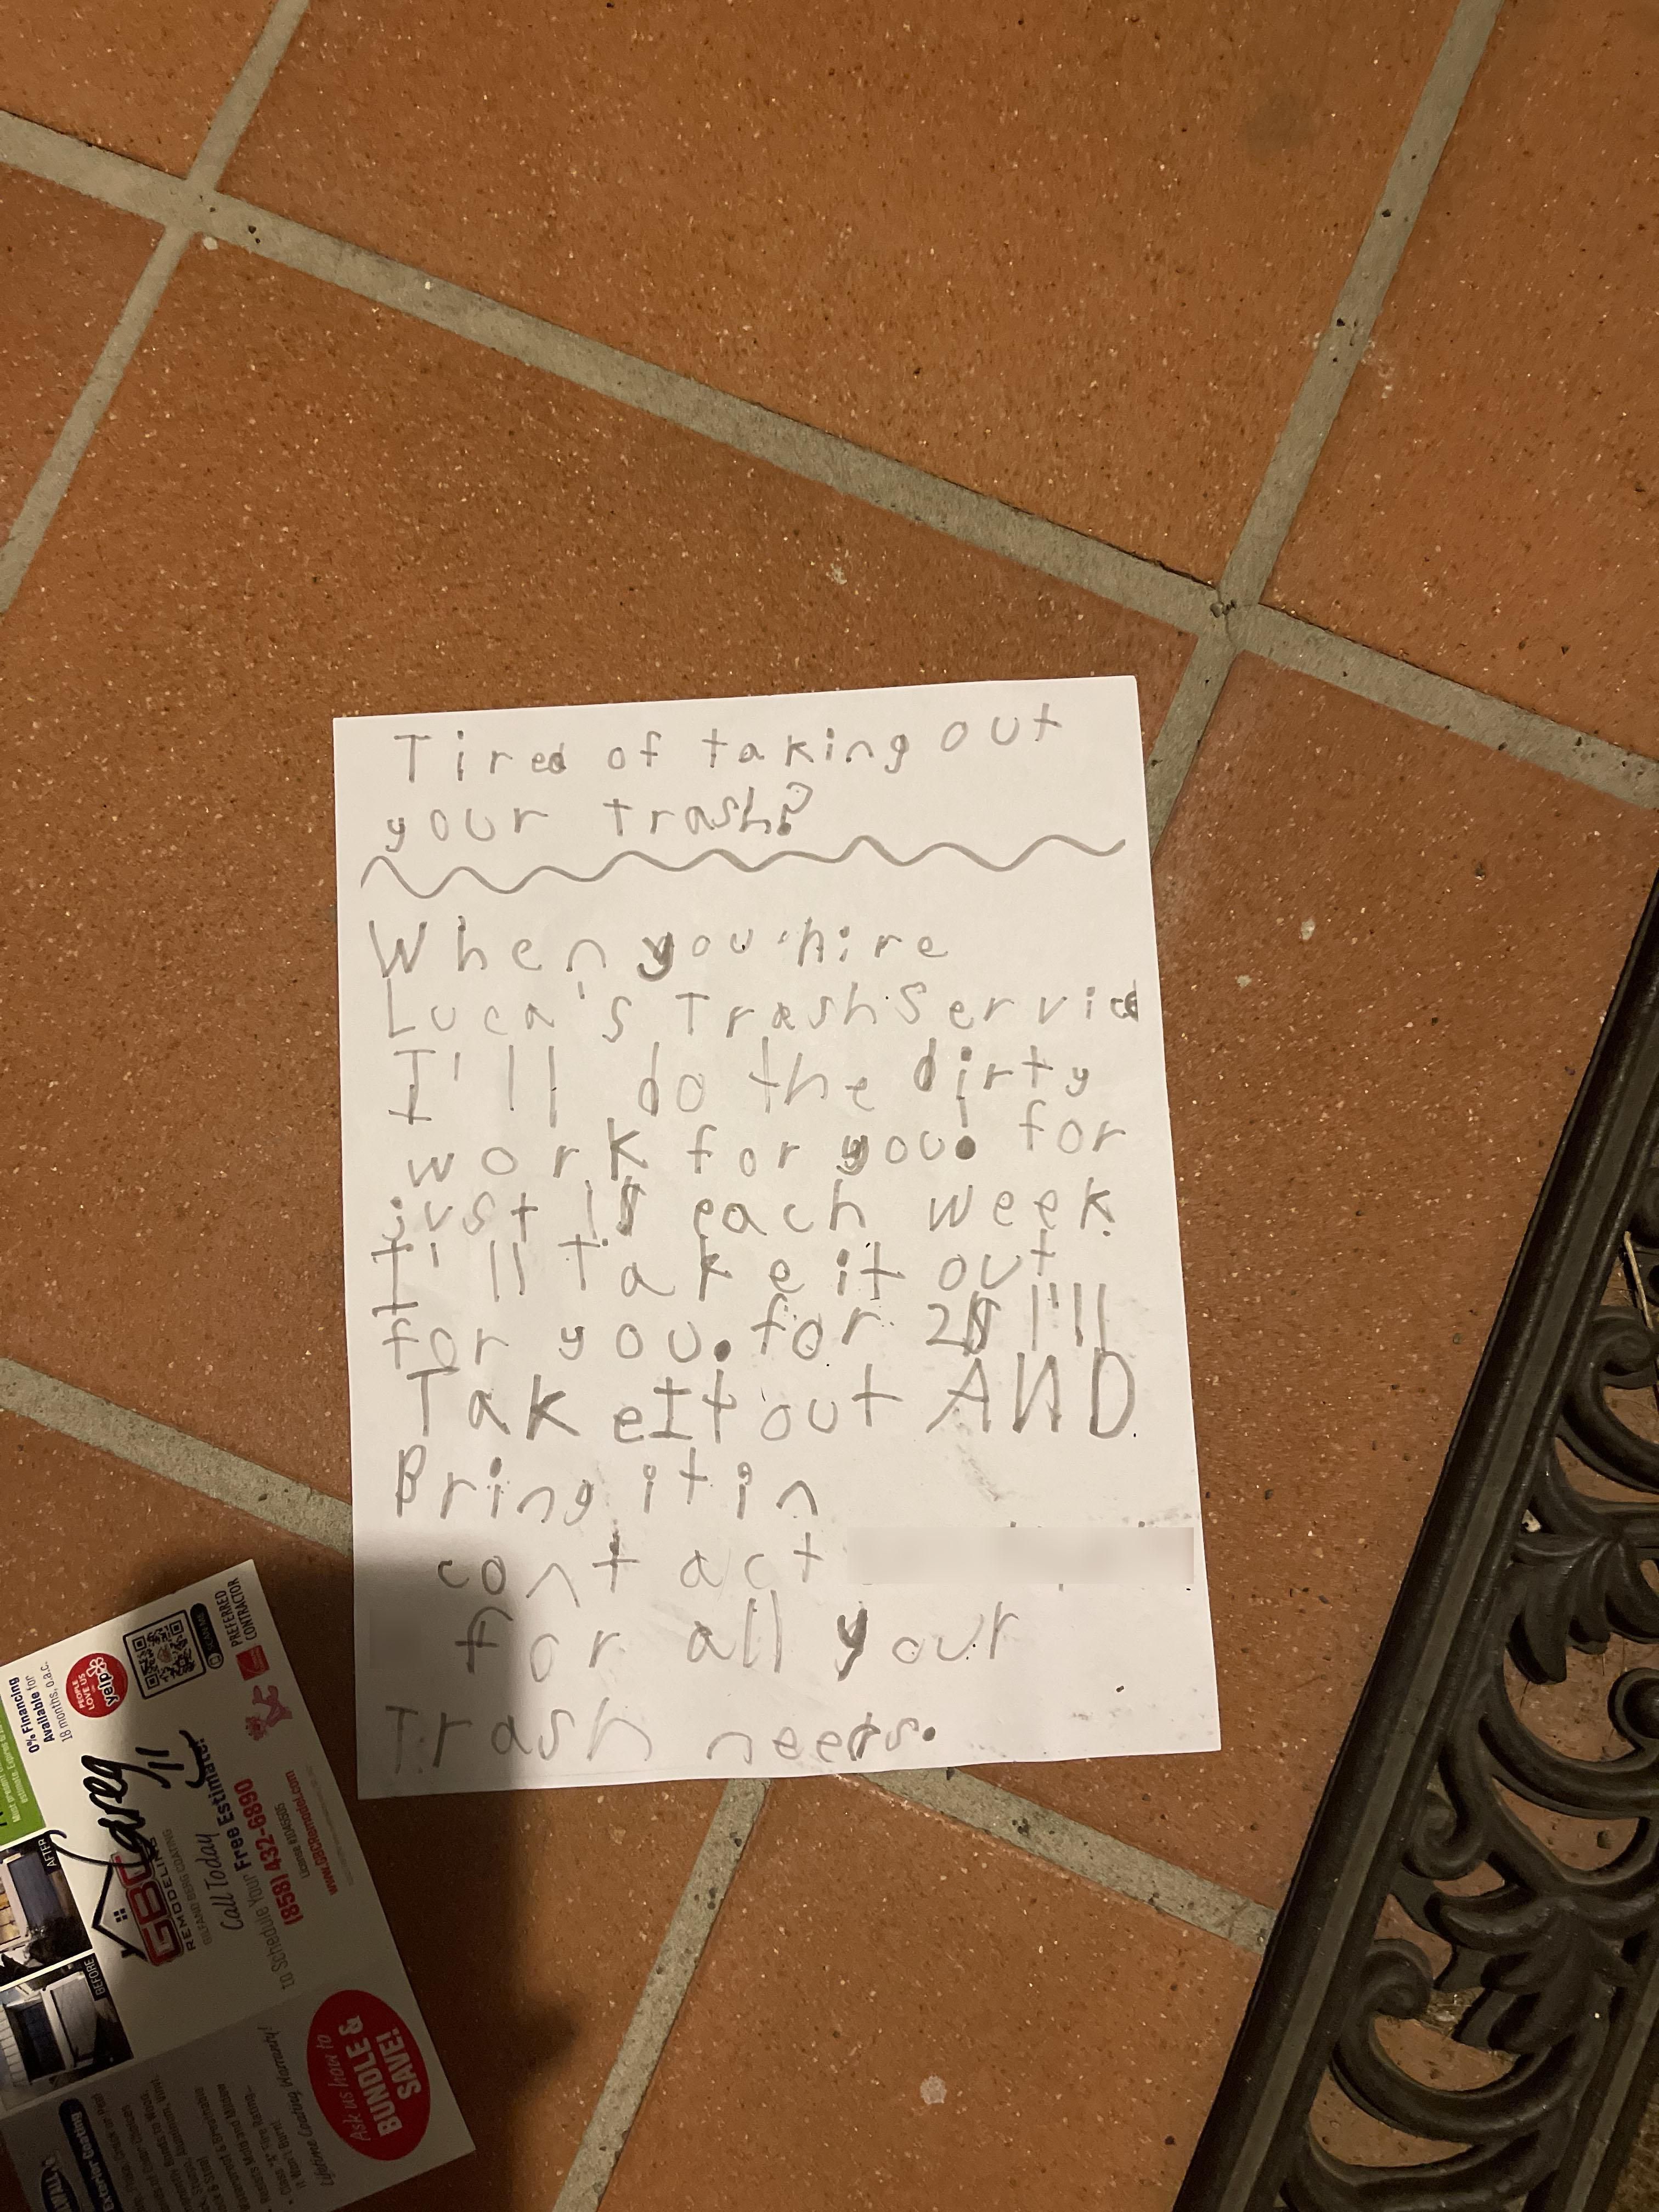 An entrepreneur left this at my front door